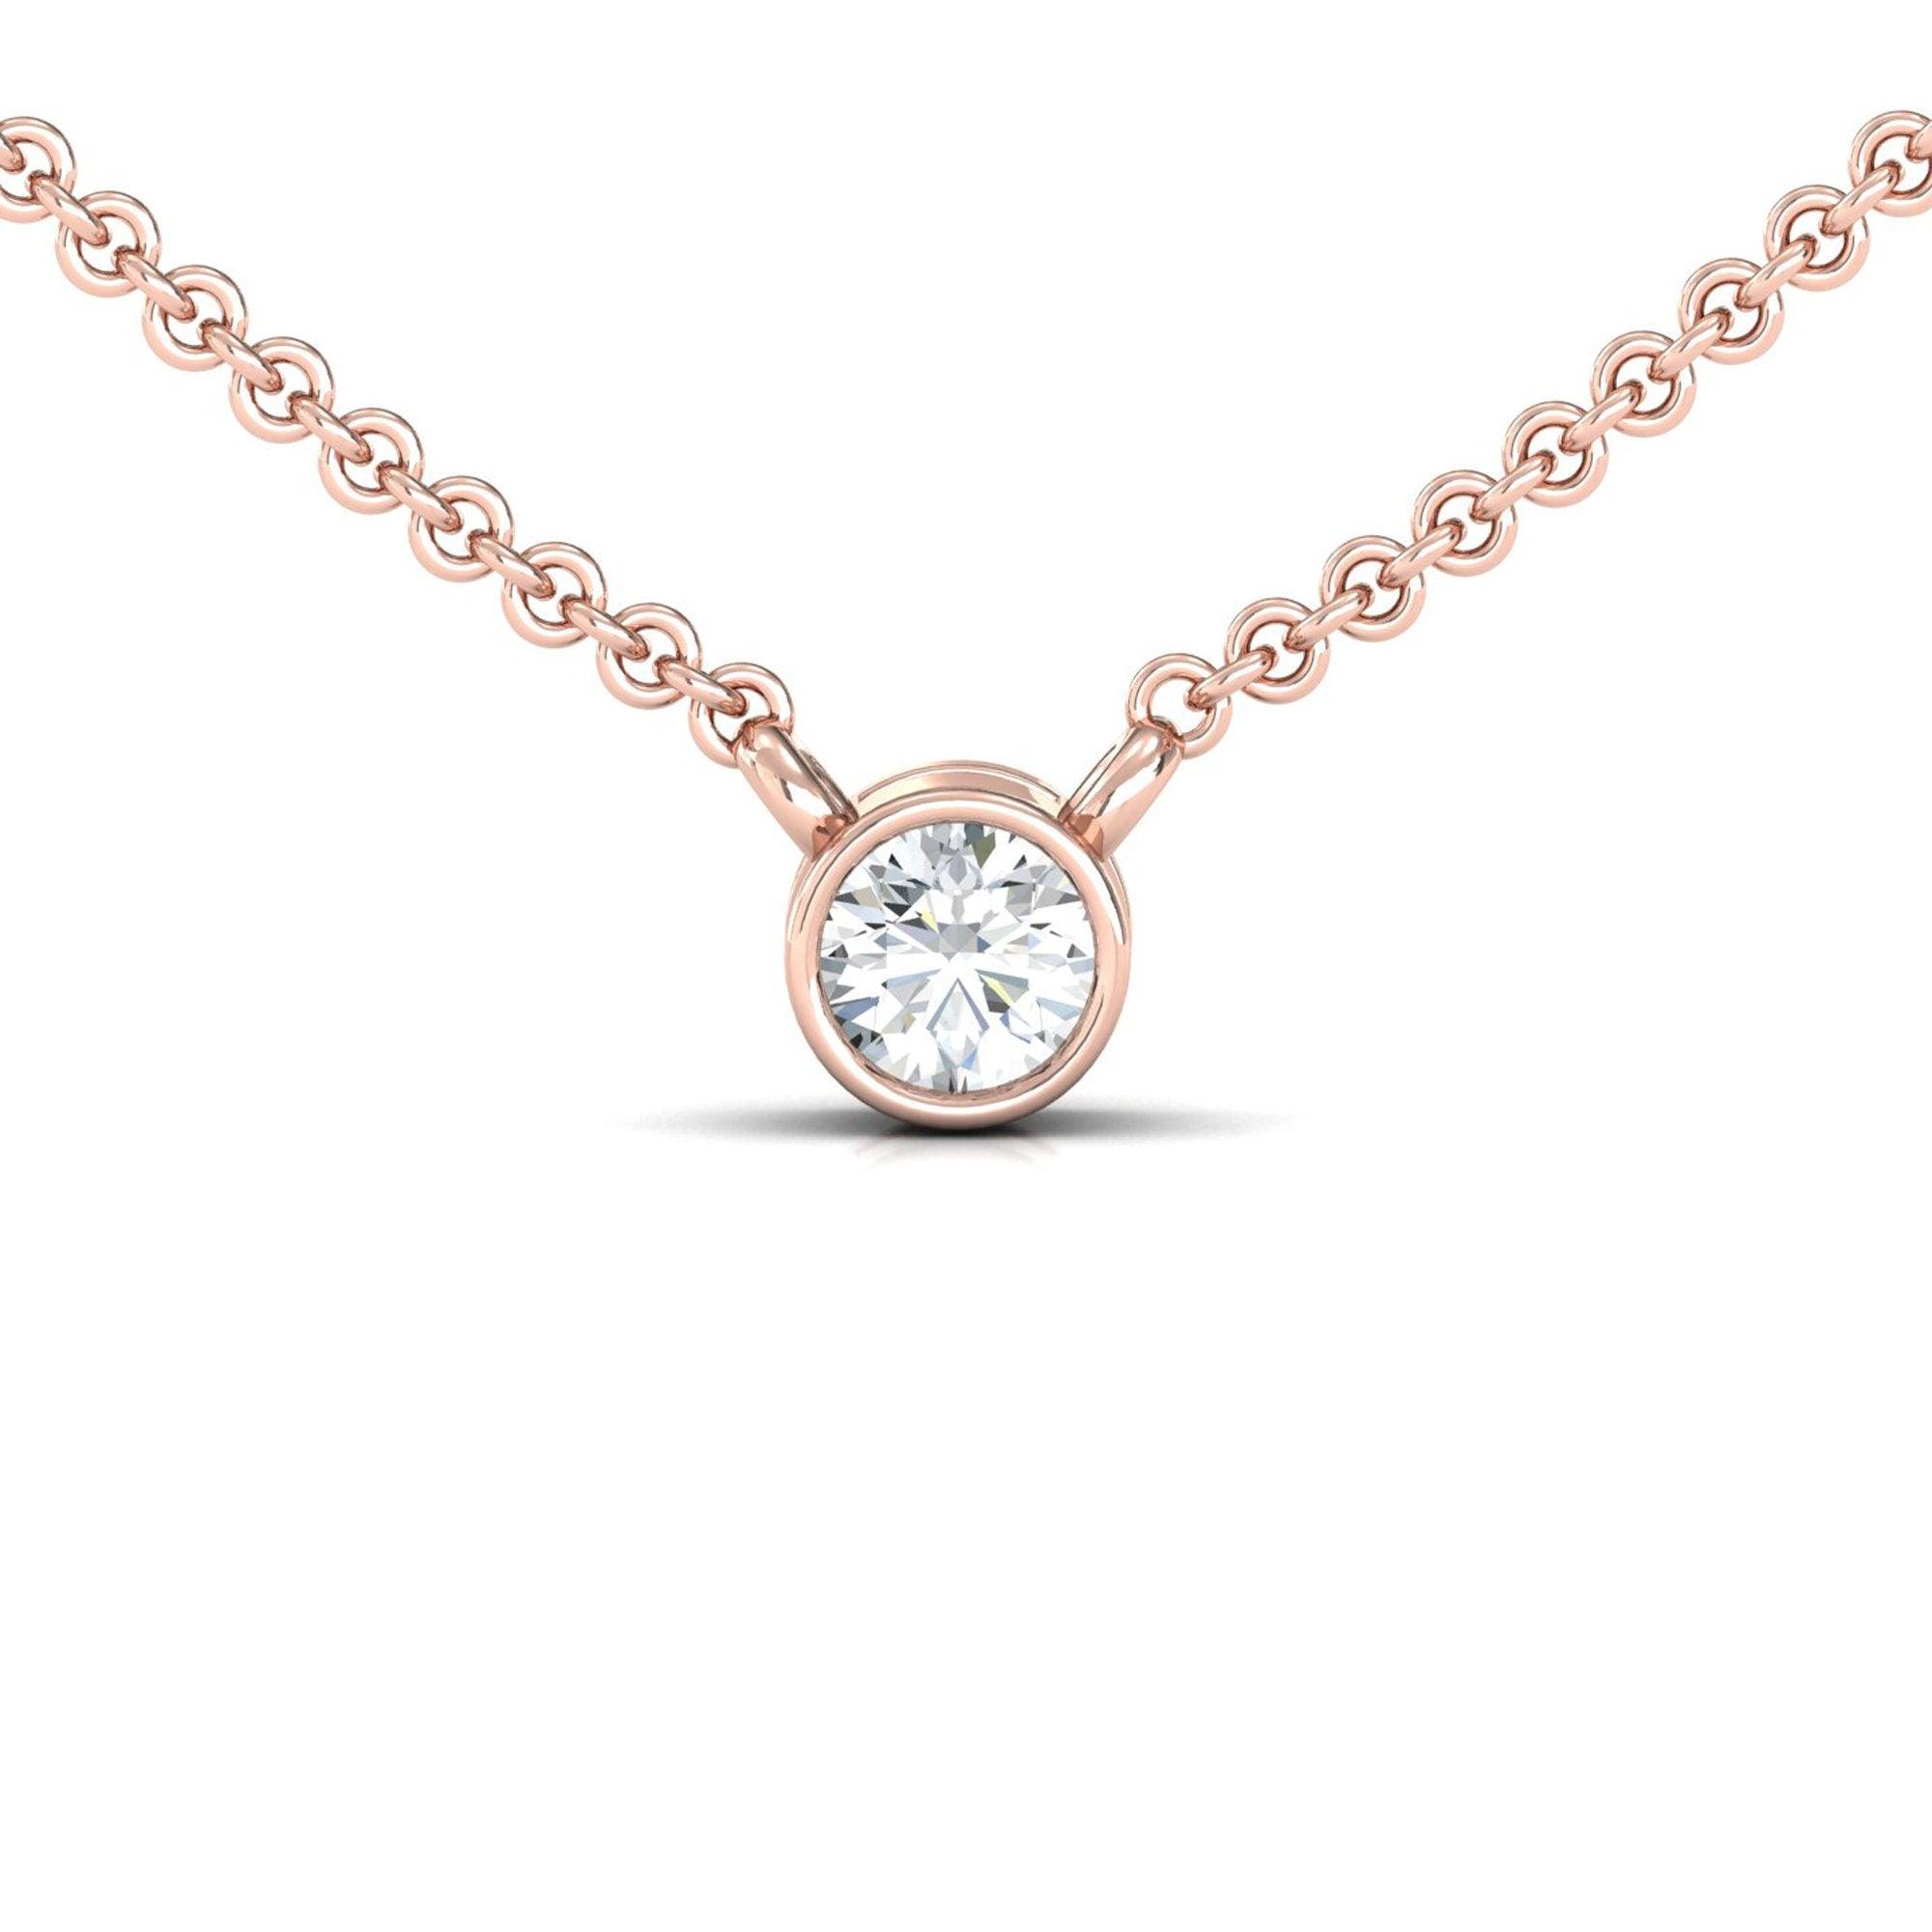 Handmade White Diamond Pendant, Real Rose Gold Bridesmaid Necklace, 10kt 14kt 18kt Yellow White Gold Pendant - GeumJewels